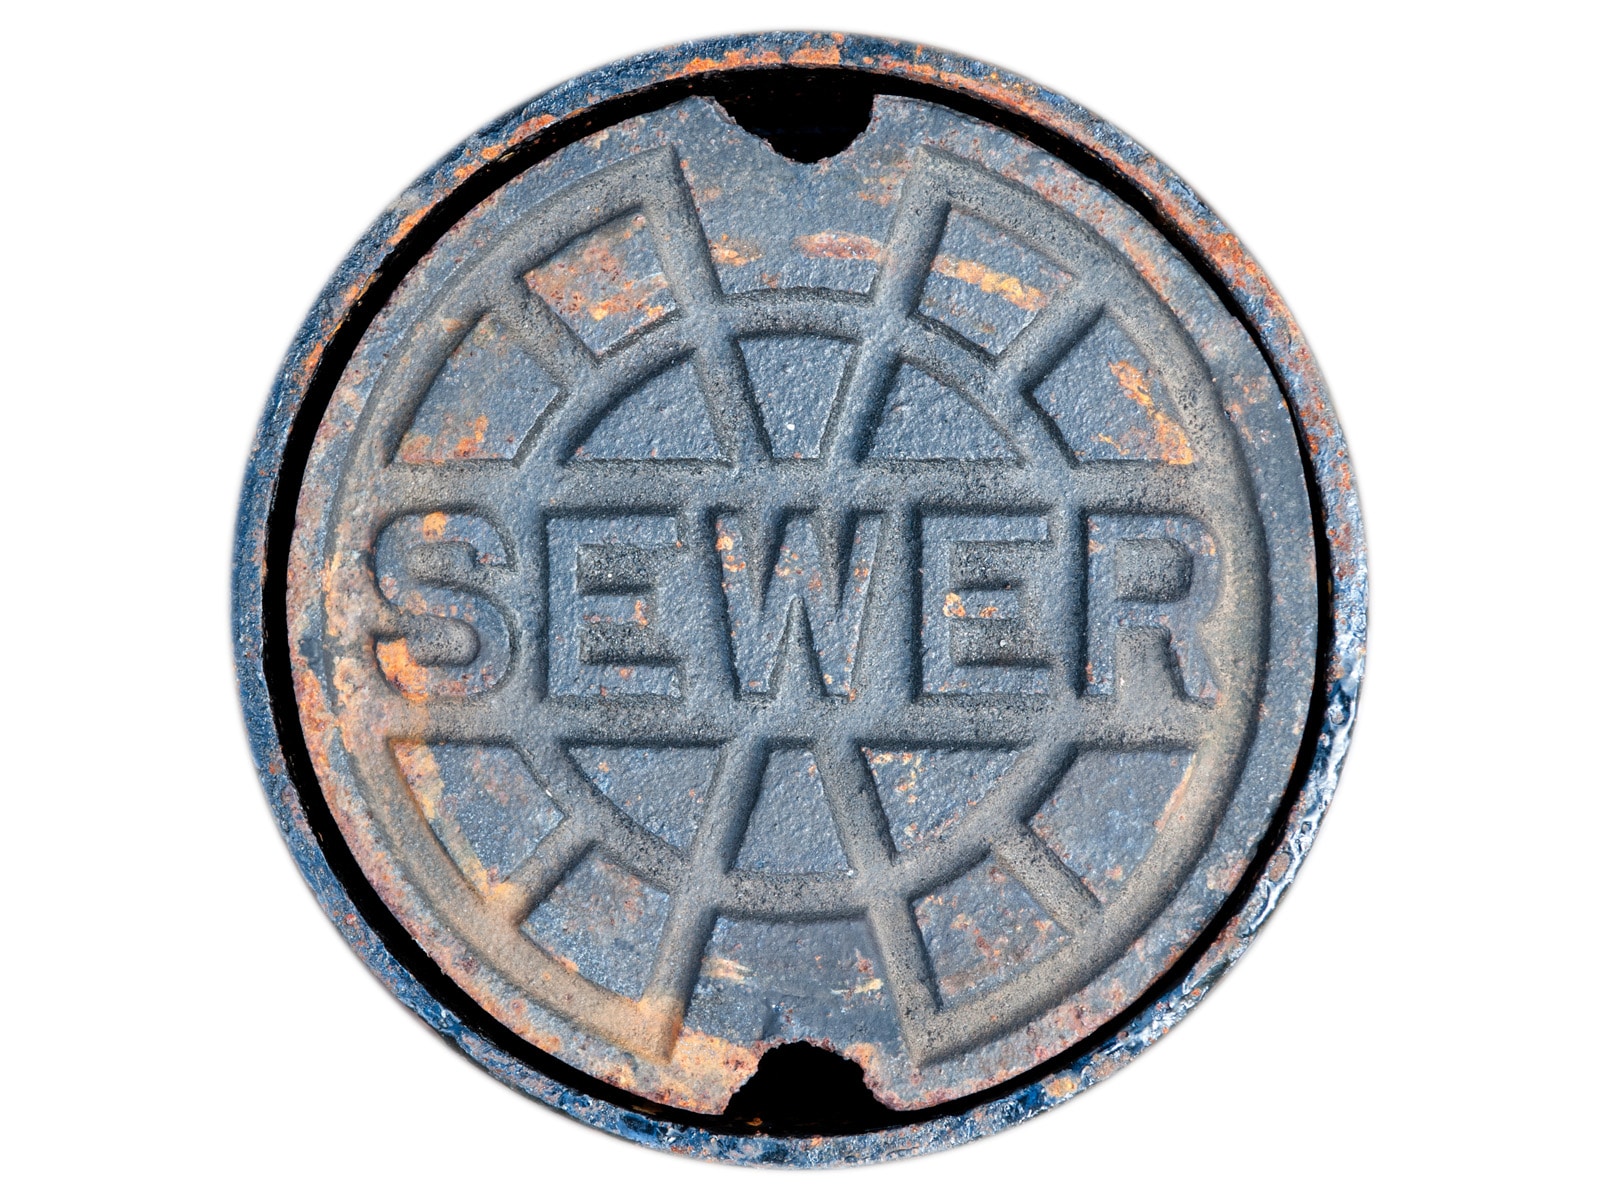 outside sewer cover